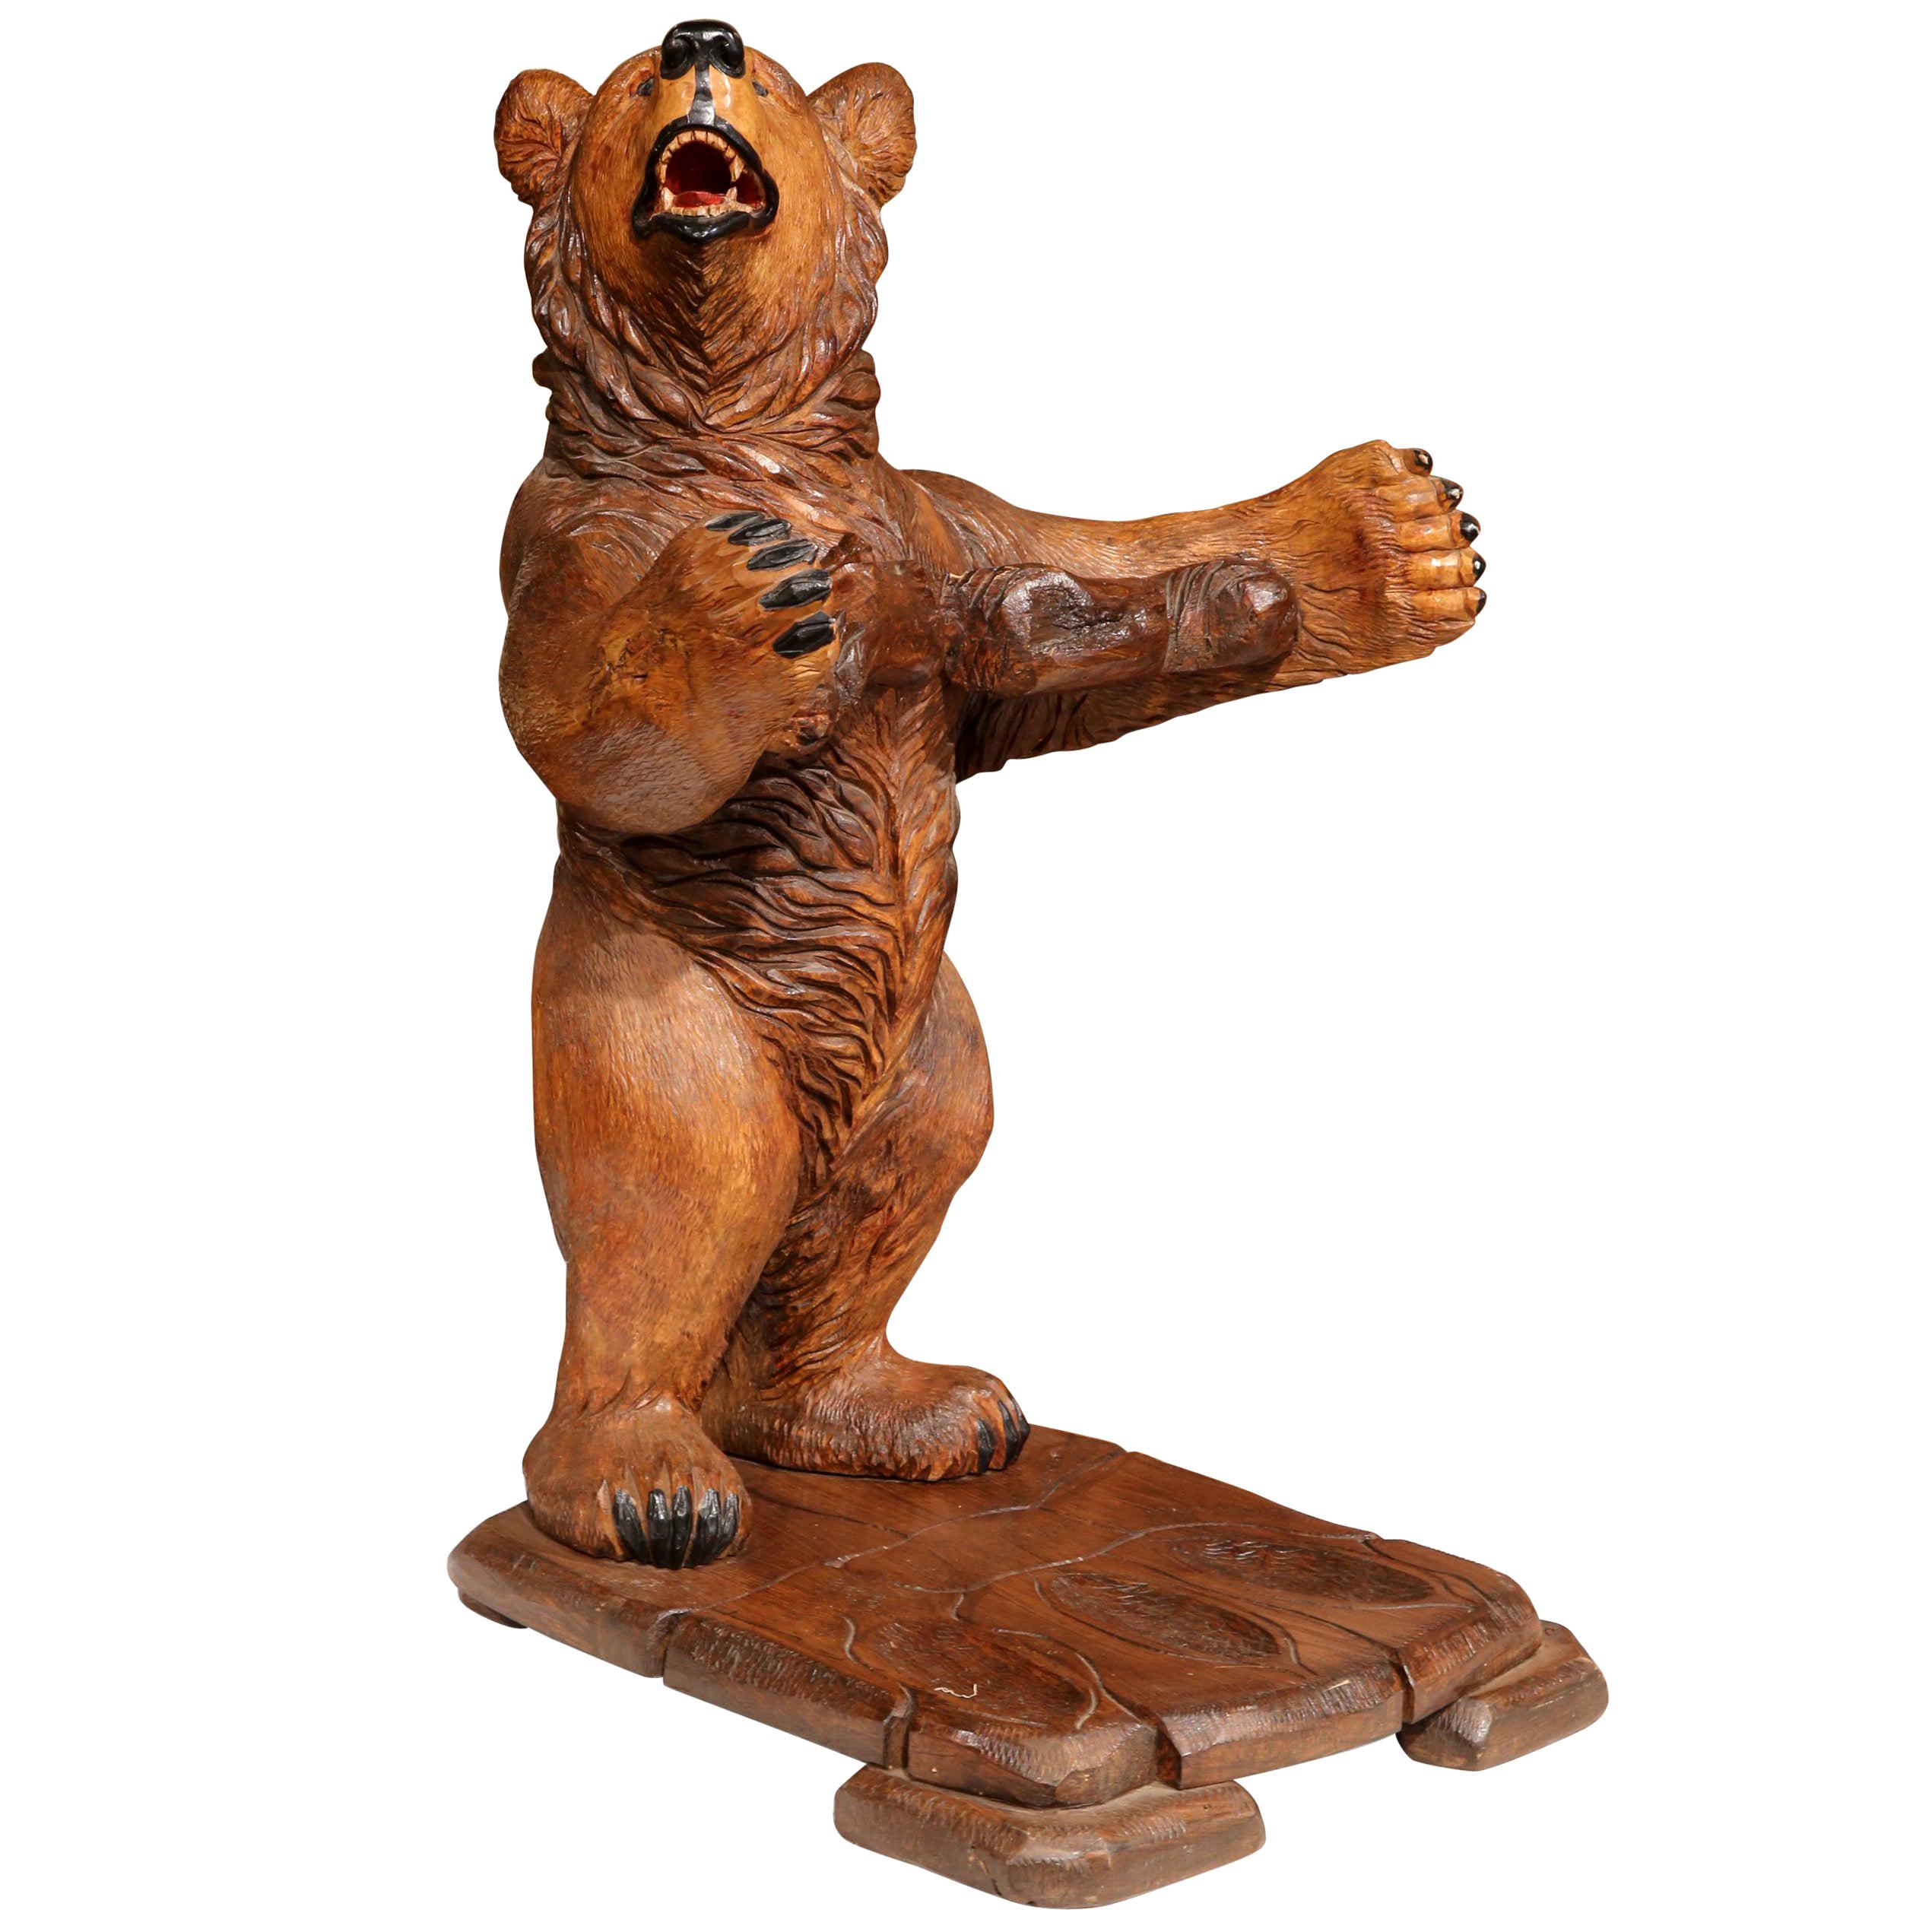 This interesting antique gun rack was carved in France, circa 1920. The oak sculpture features a young bear standing up with open arms. The wooden animal figure has an expressive face, and detailed texture throughout the body. The piece will hold